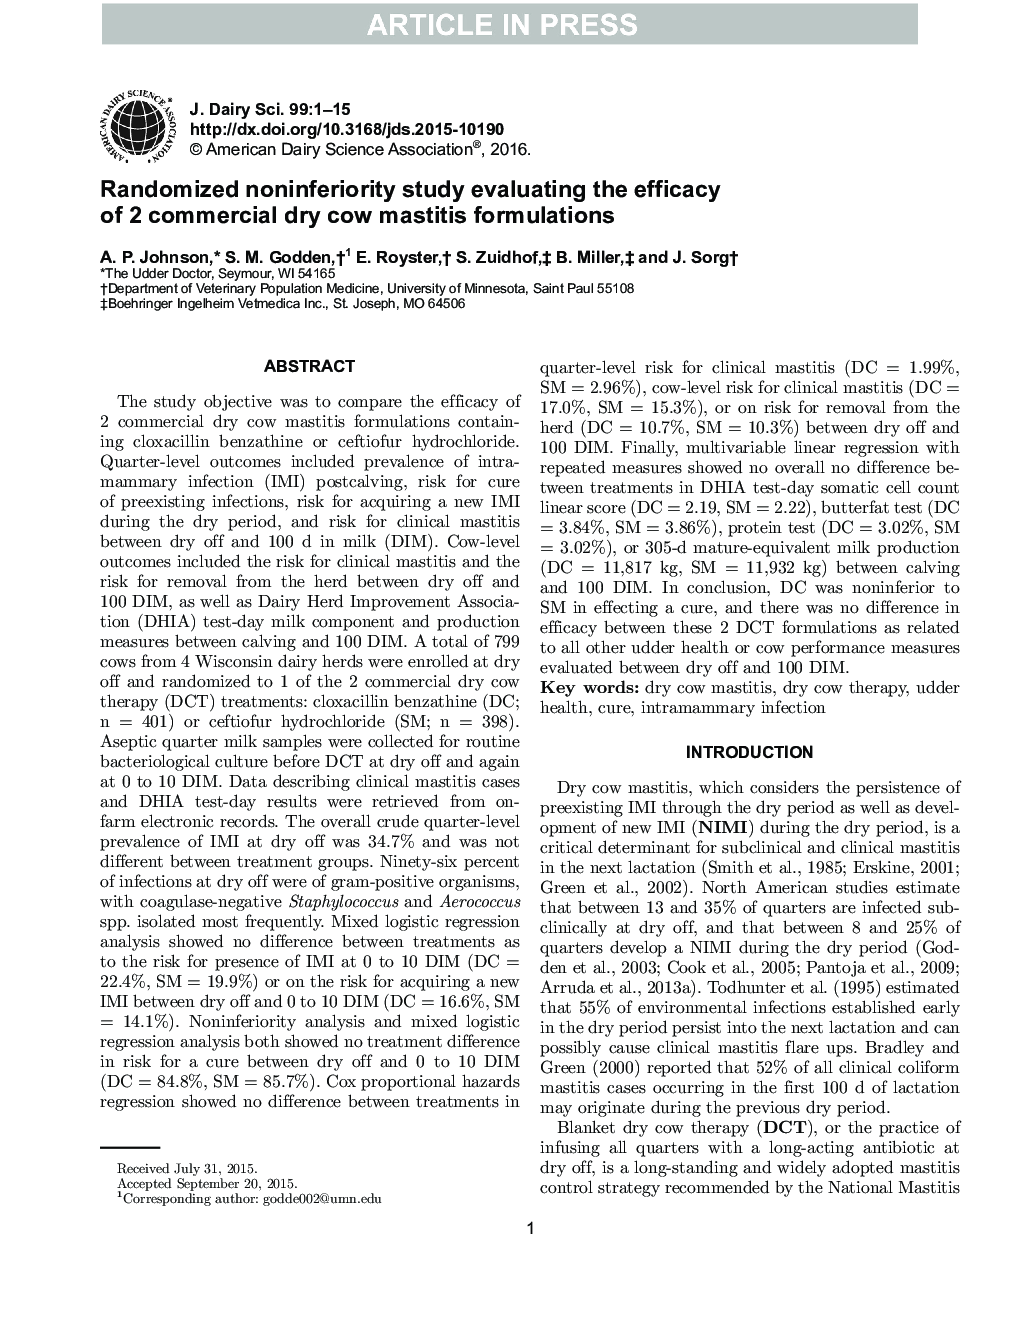 Randomized noninferiority study evaluating the efficacy of 2 commercial dry cow mastitis formulations